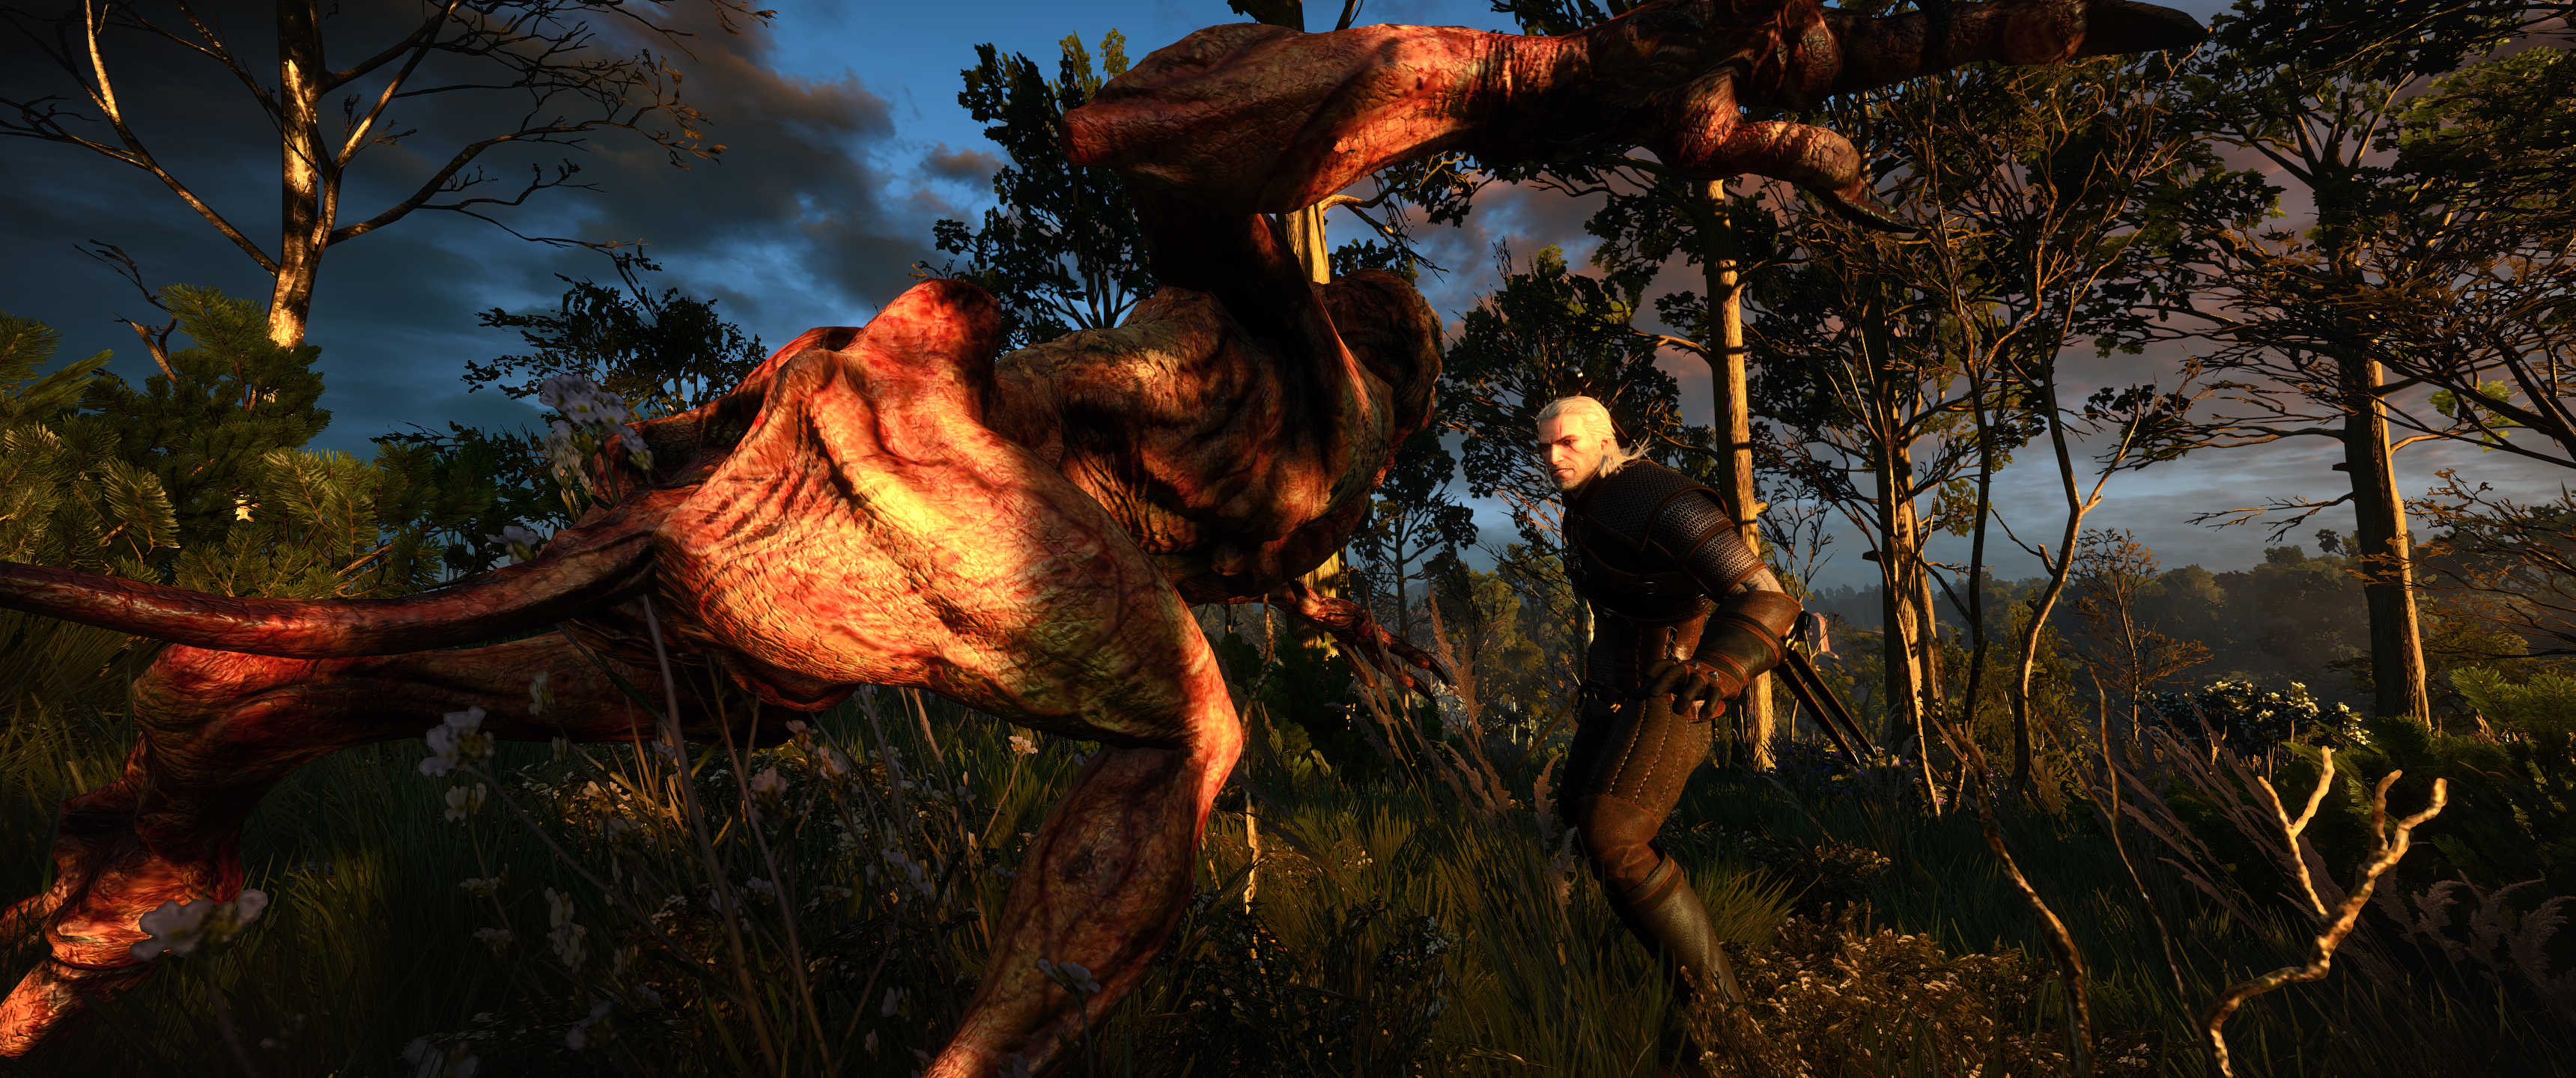 witcher3_2015_05_22_17qj45.png